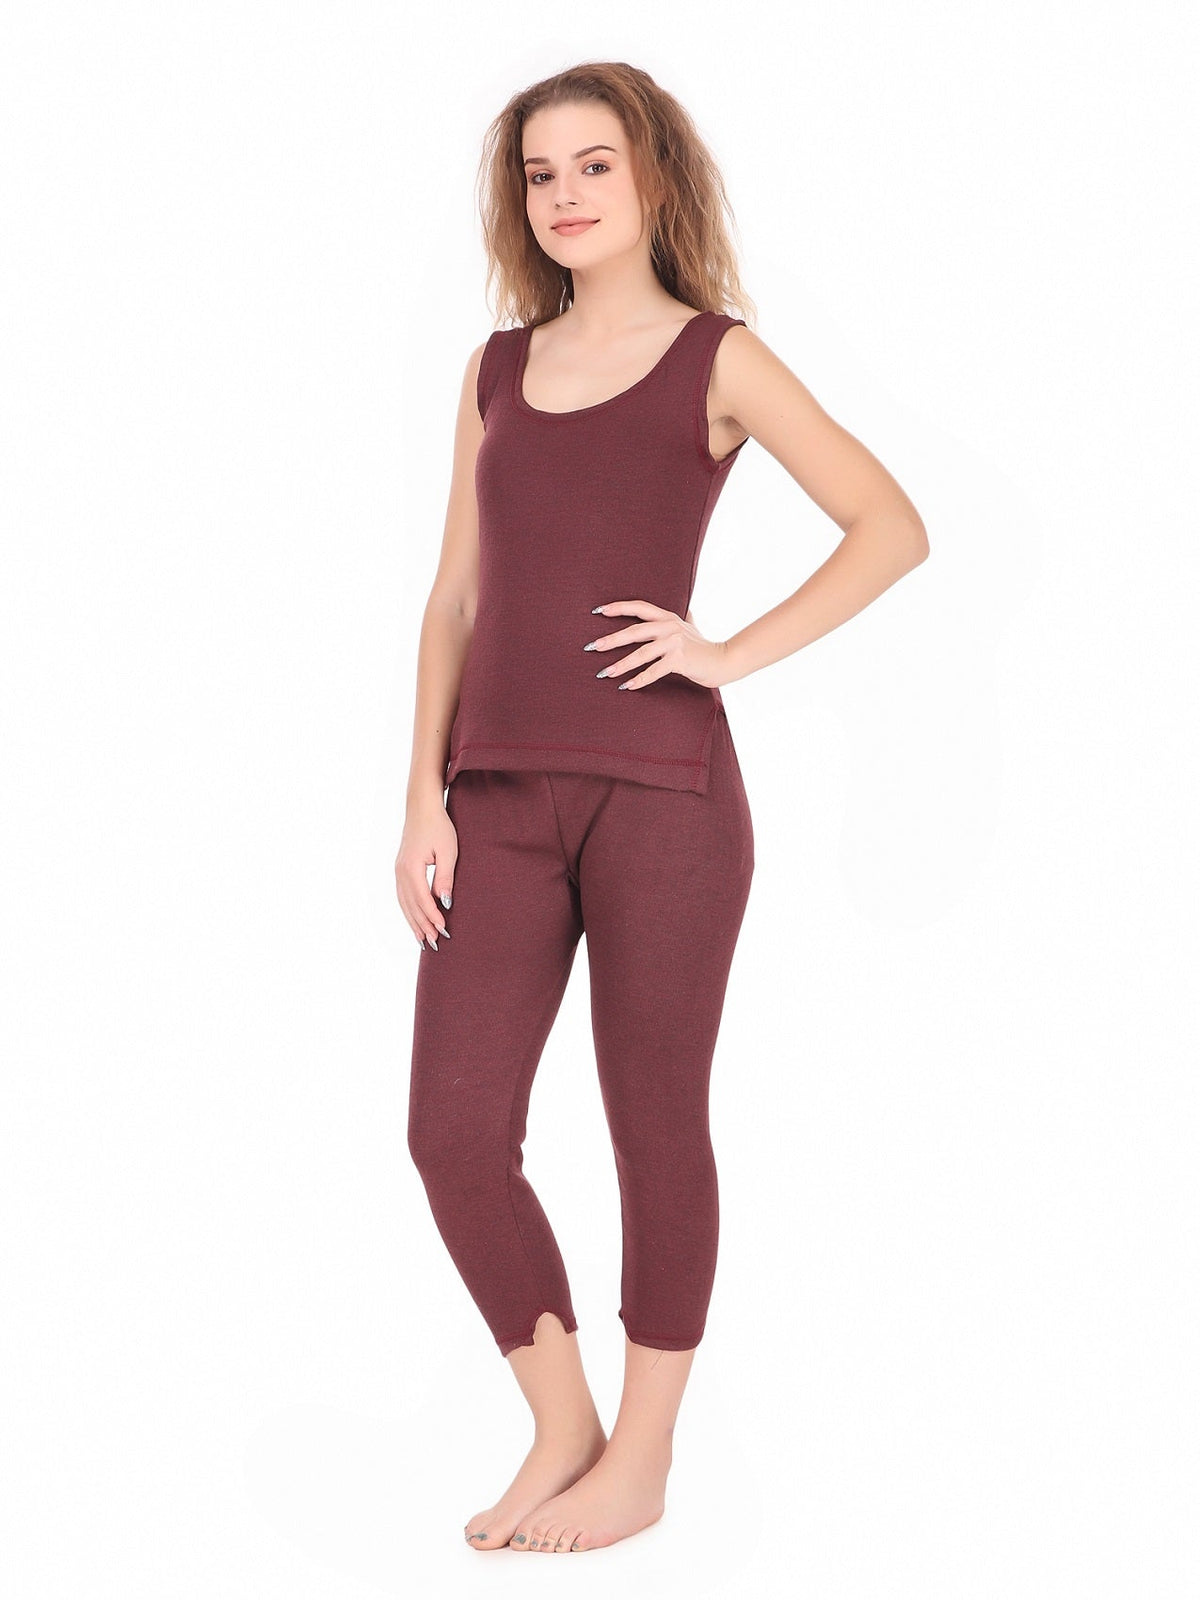 Thermal Pocket Leggings | Earthy clothing inspired by fairytale and  festivals as well as by underground communities of artists and travelers.